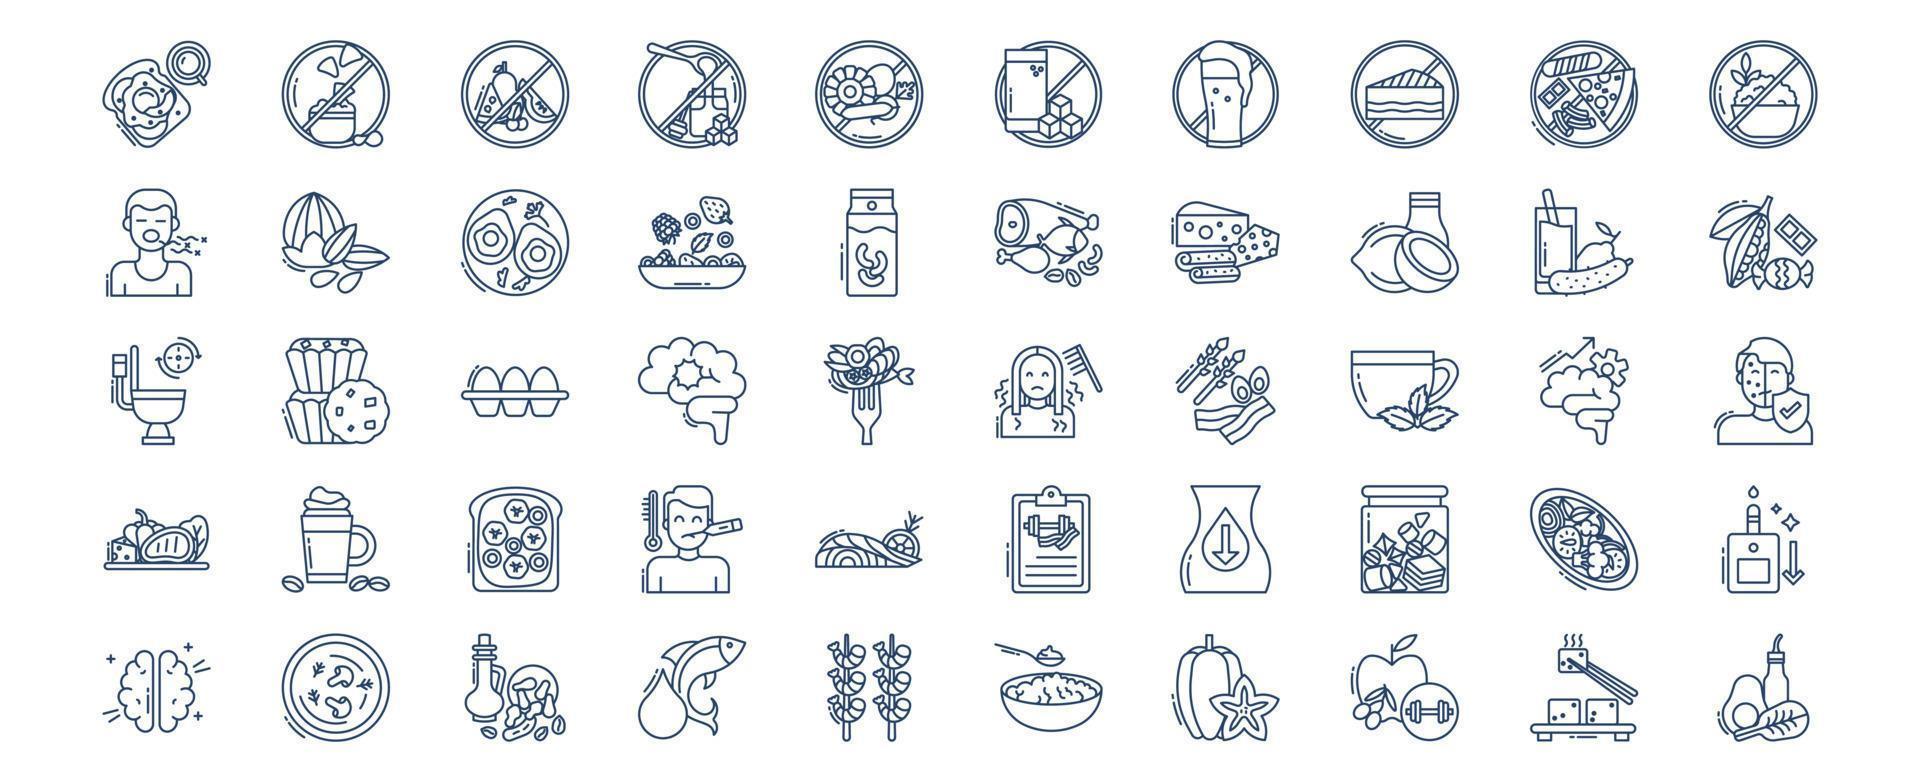 Collection of icons related to Keto Diet and food, including icons like Avocado, Grains,  egg, Cheese  and more. vector illustrations, Pixel Perfect set